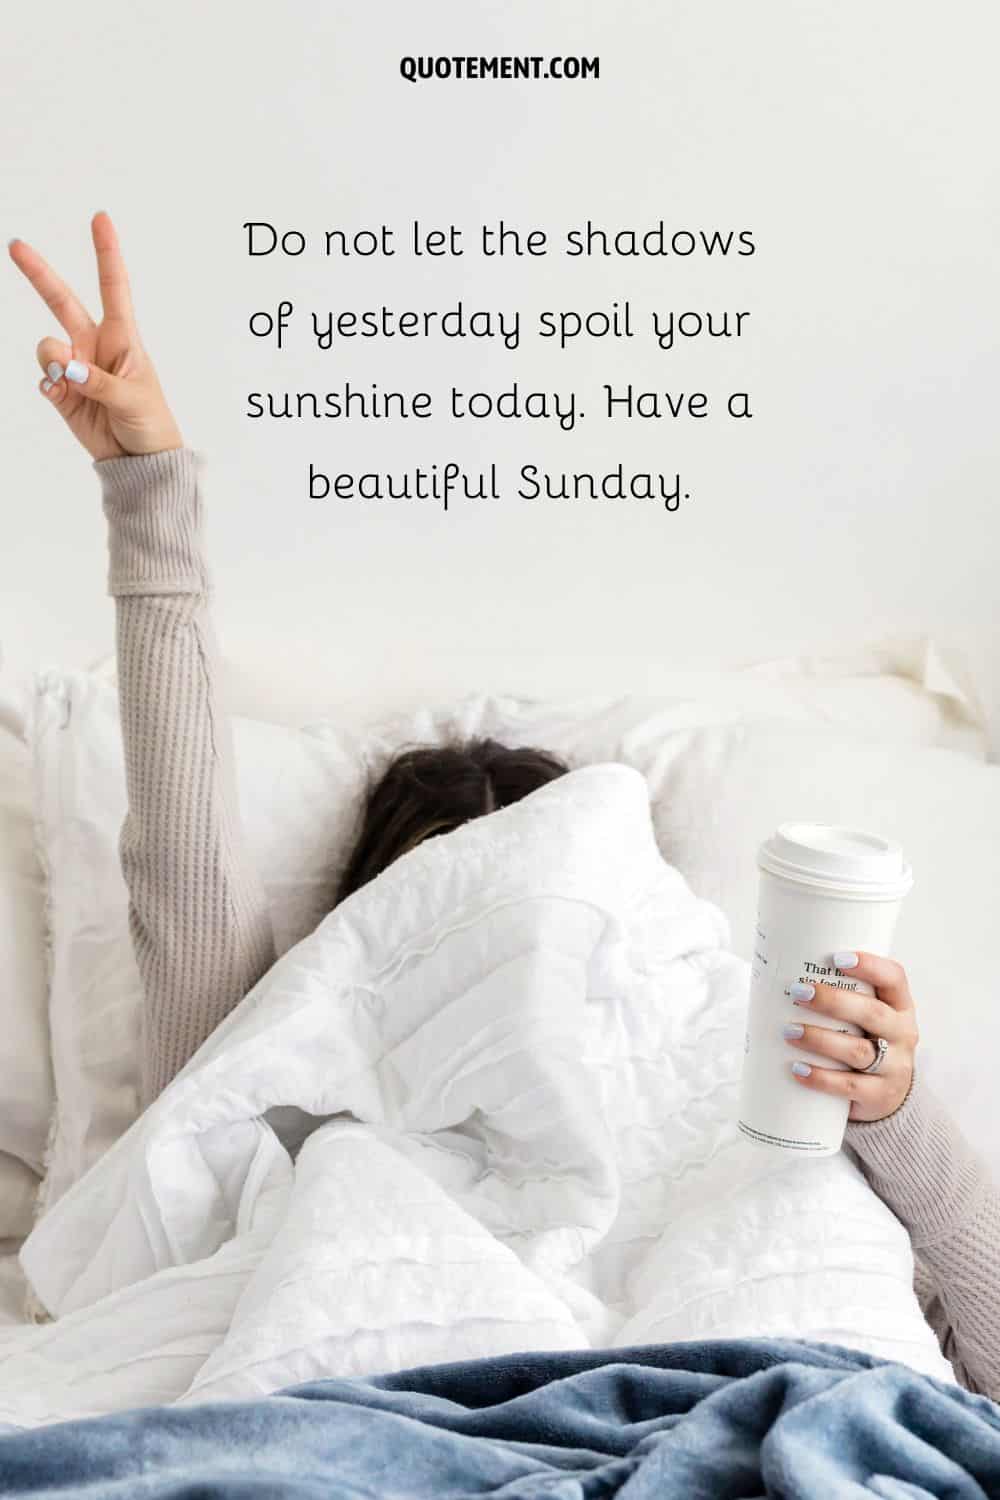 “Do not let the shadows of yesterday spoil your sunshine today. Have a beautiful Sunday.”